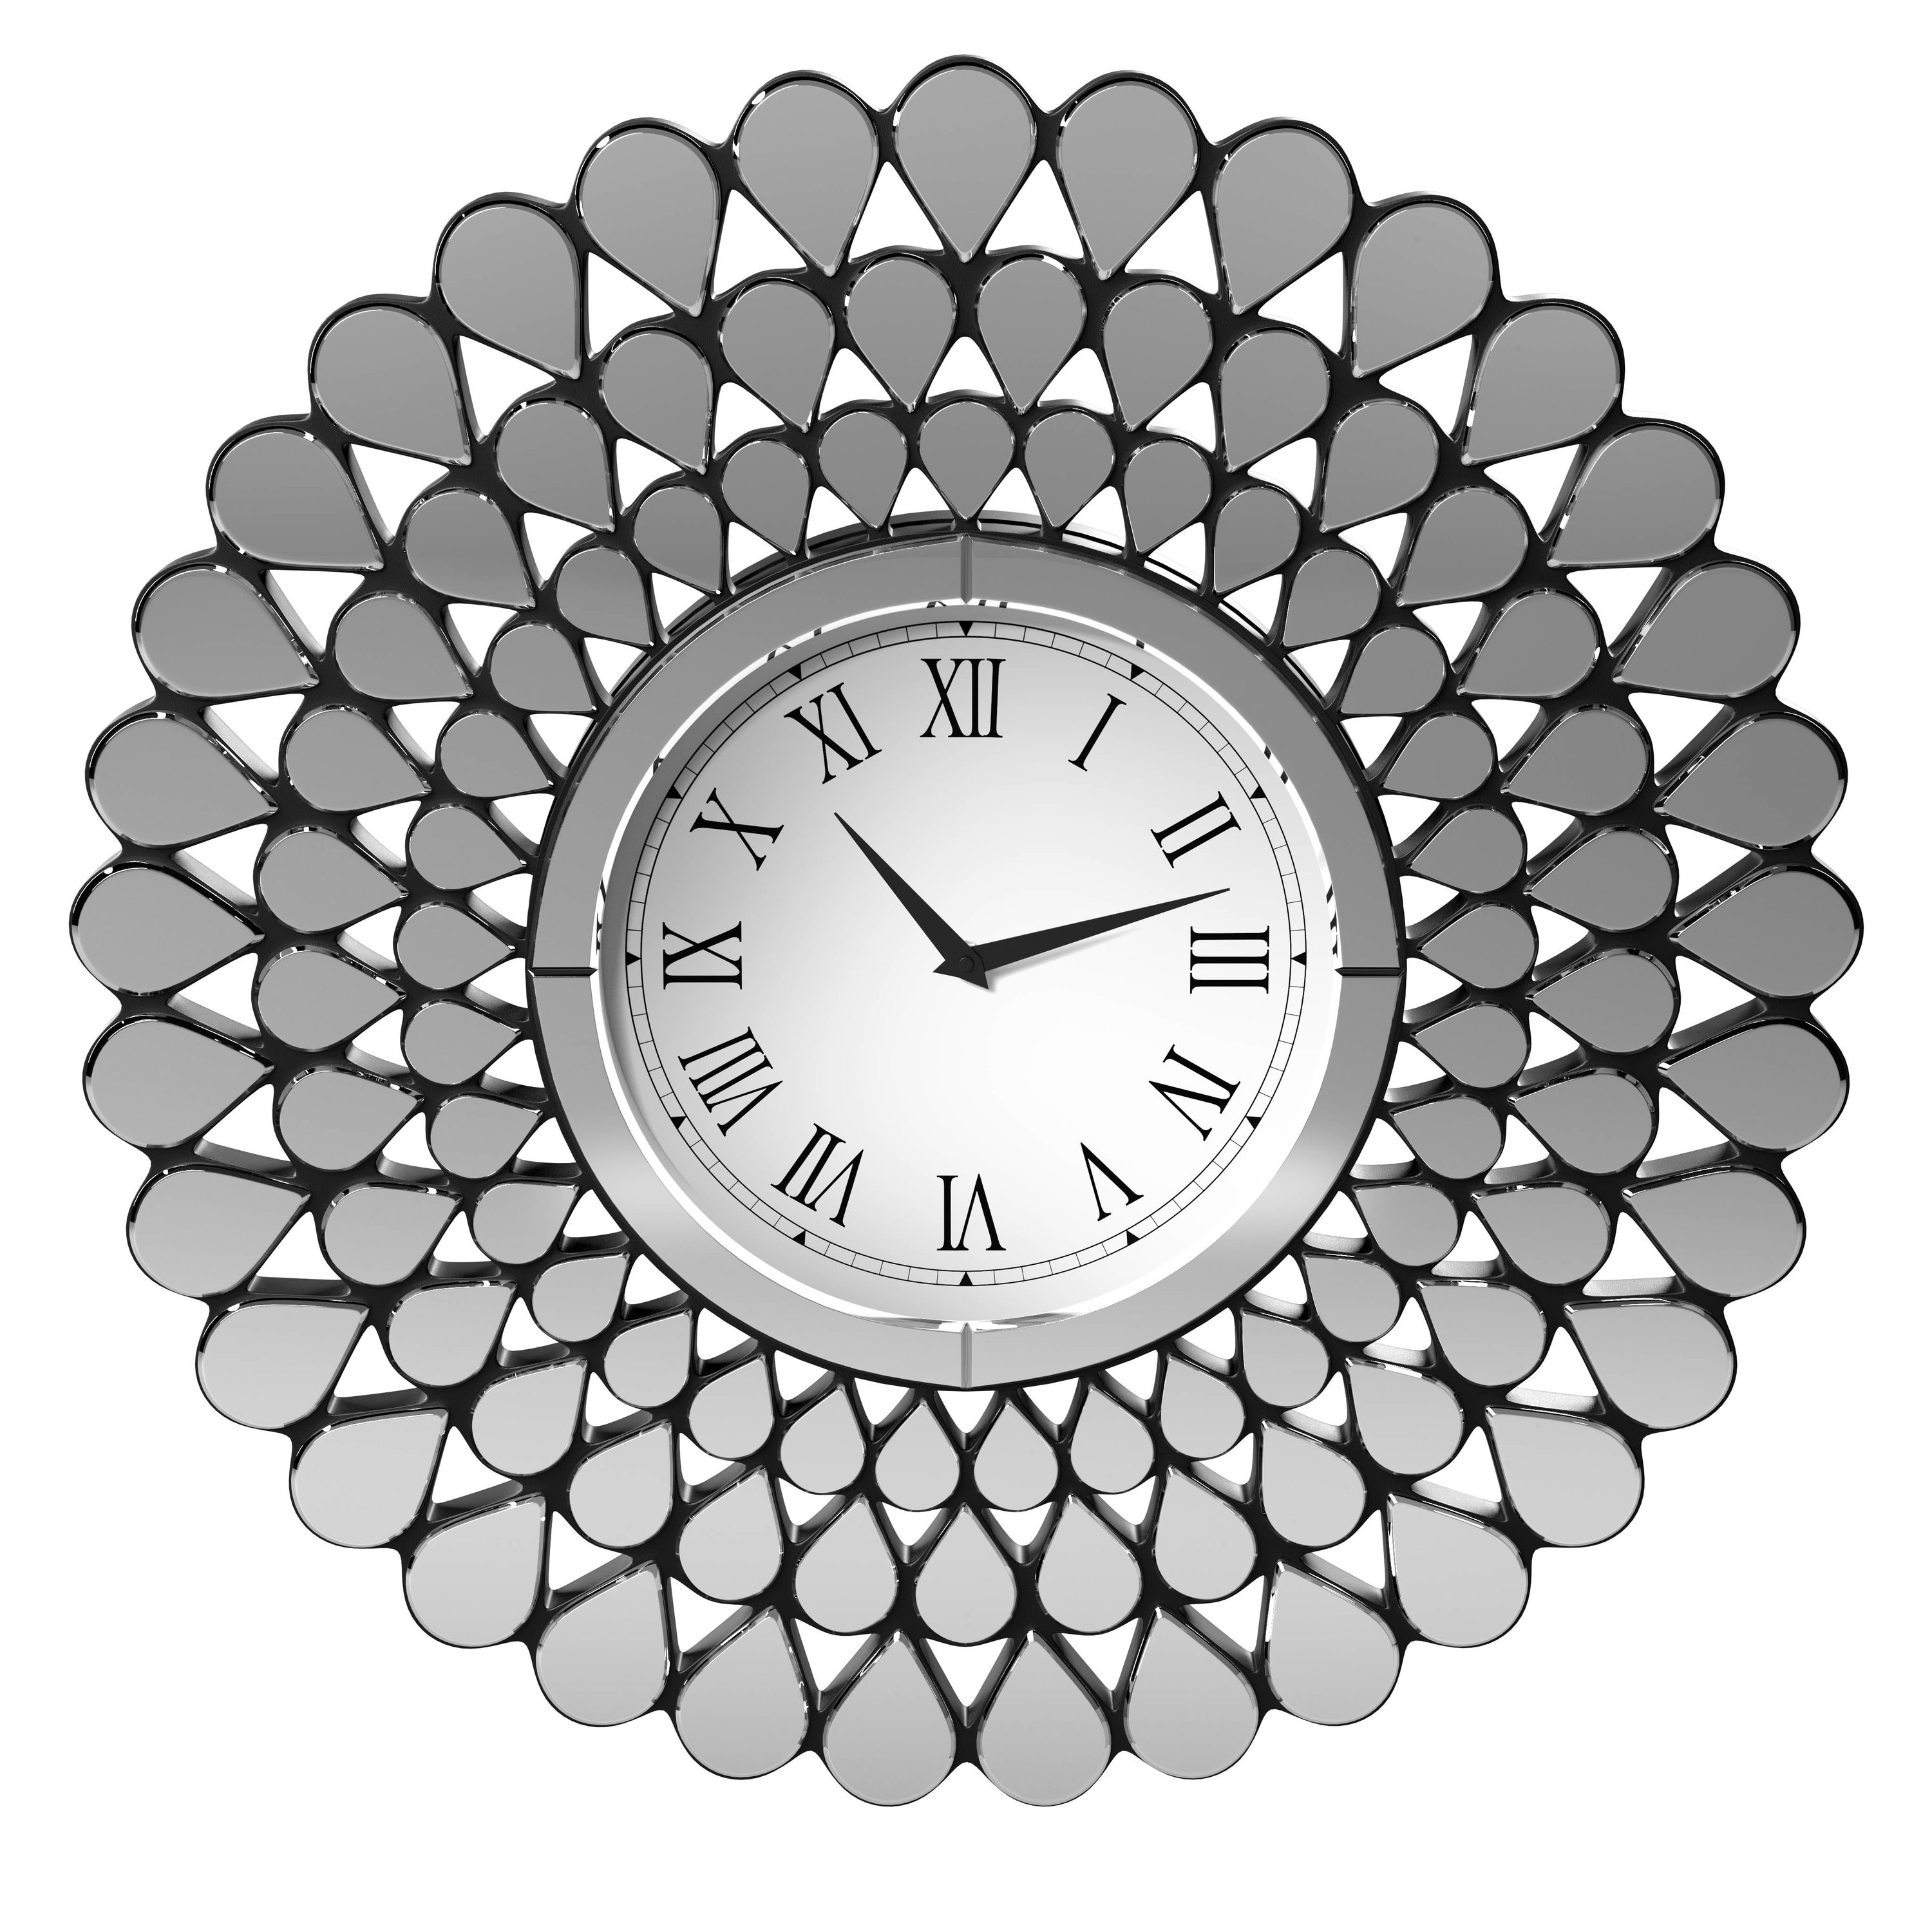 Spicers, Modern and Vintage Home, Jewellery, Clocks, Ceramics and Silver